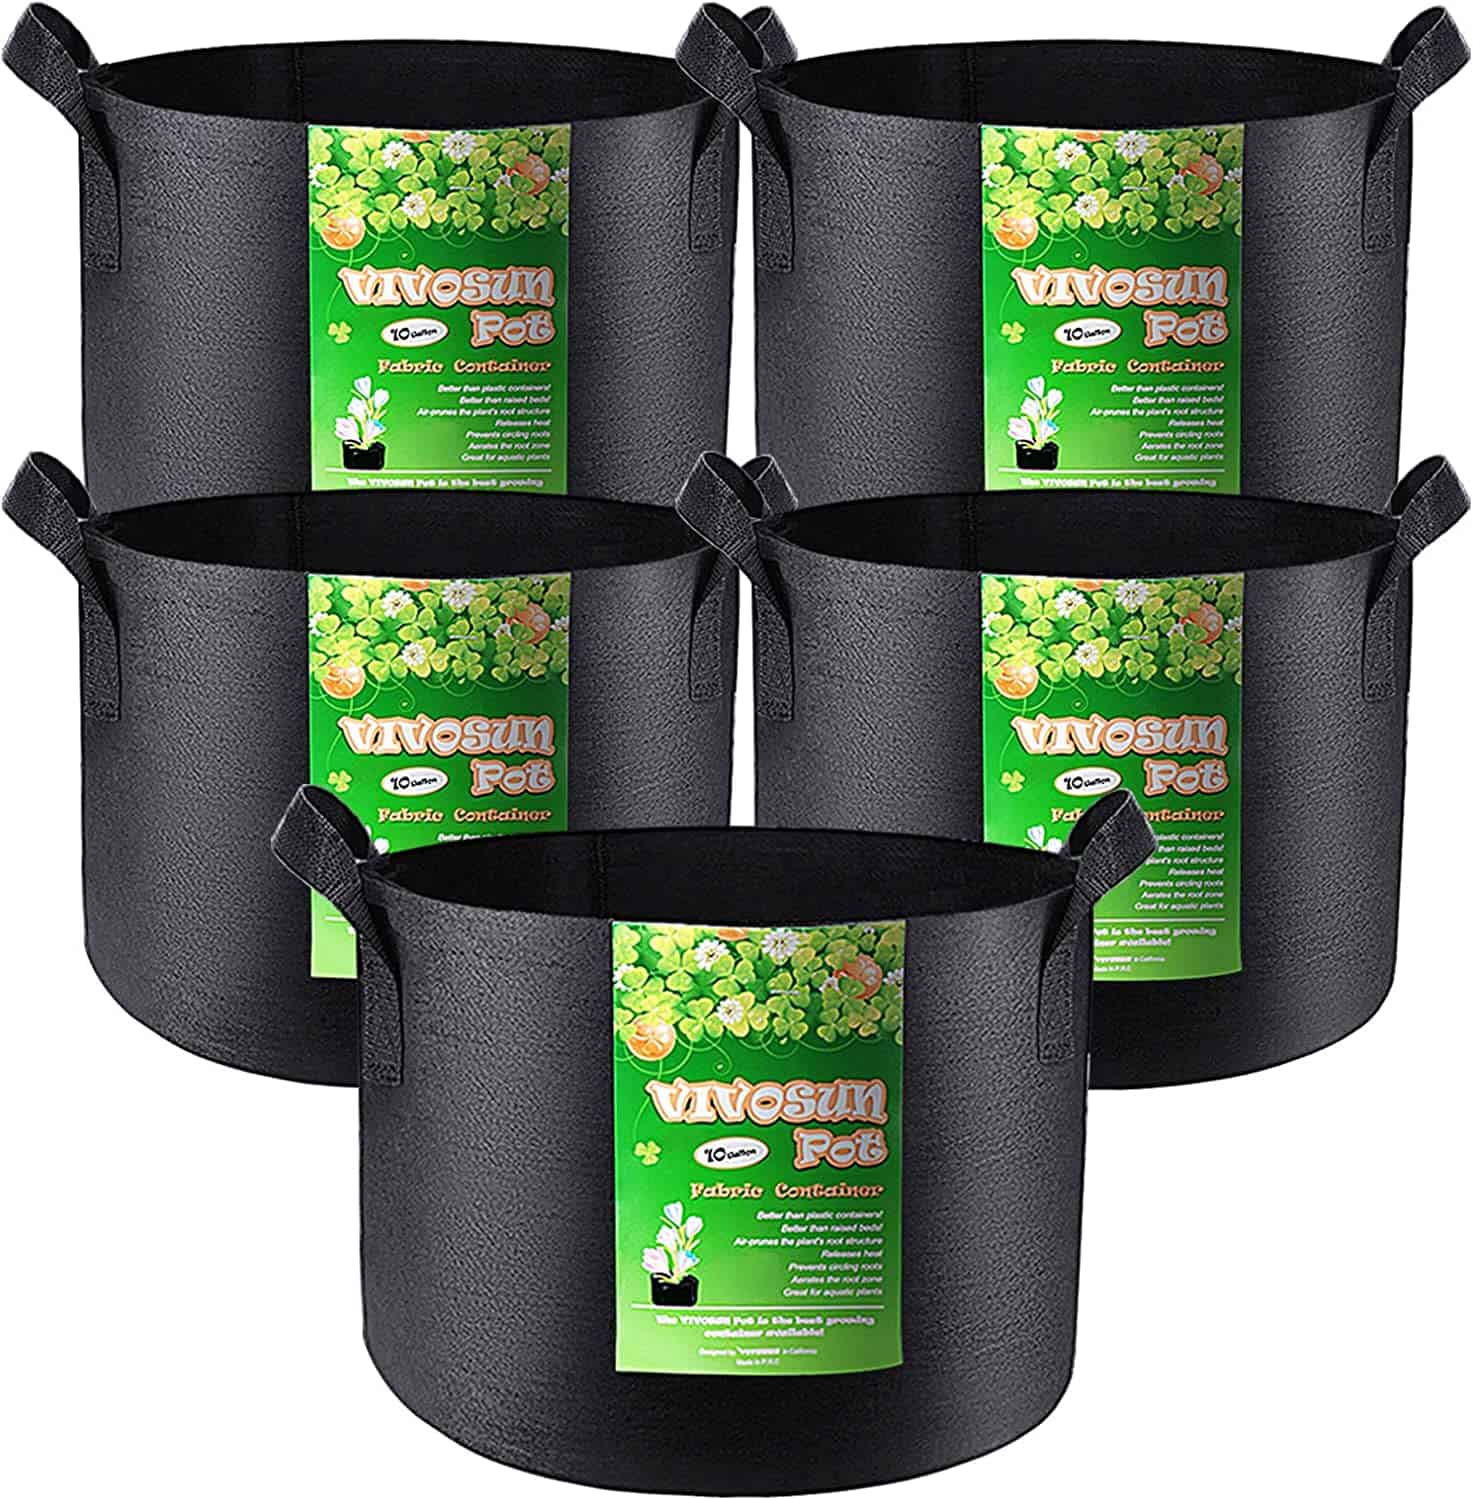 5-Pack 10 Gallon Plant Grow Bags, Heavy Duty Thickened Nonwoven Fabric Pots with Handles